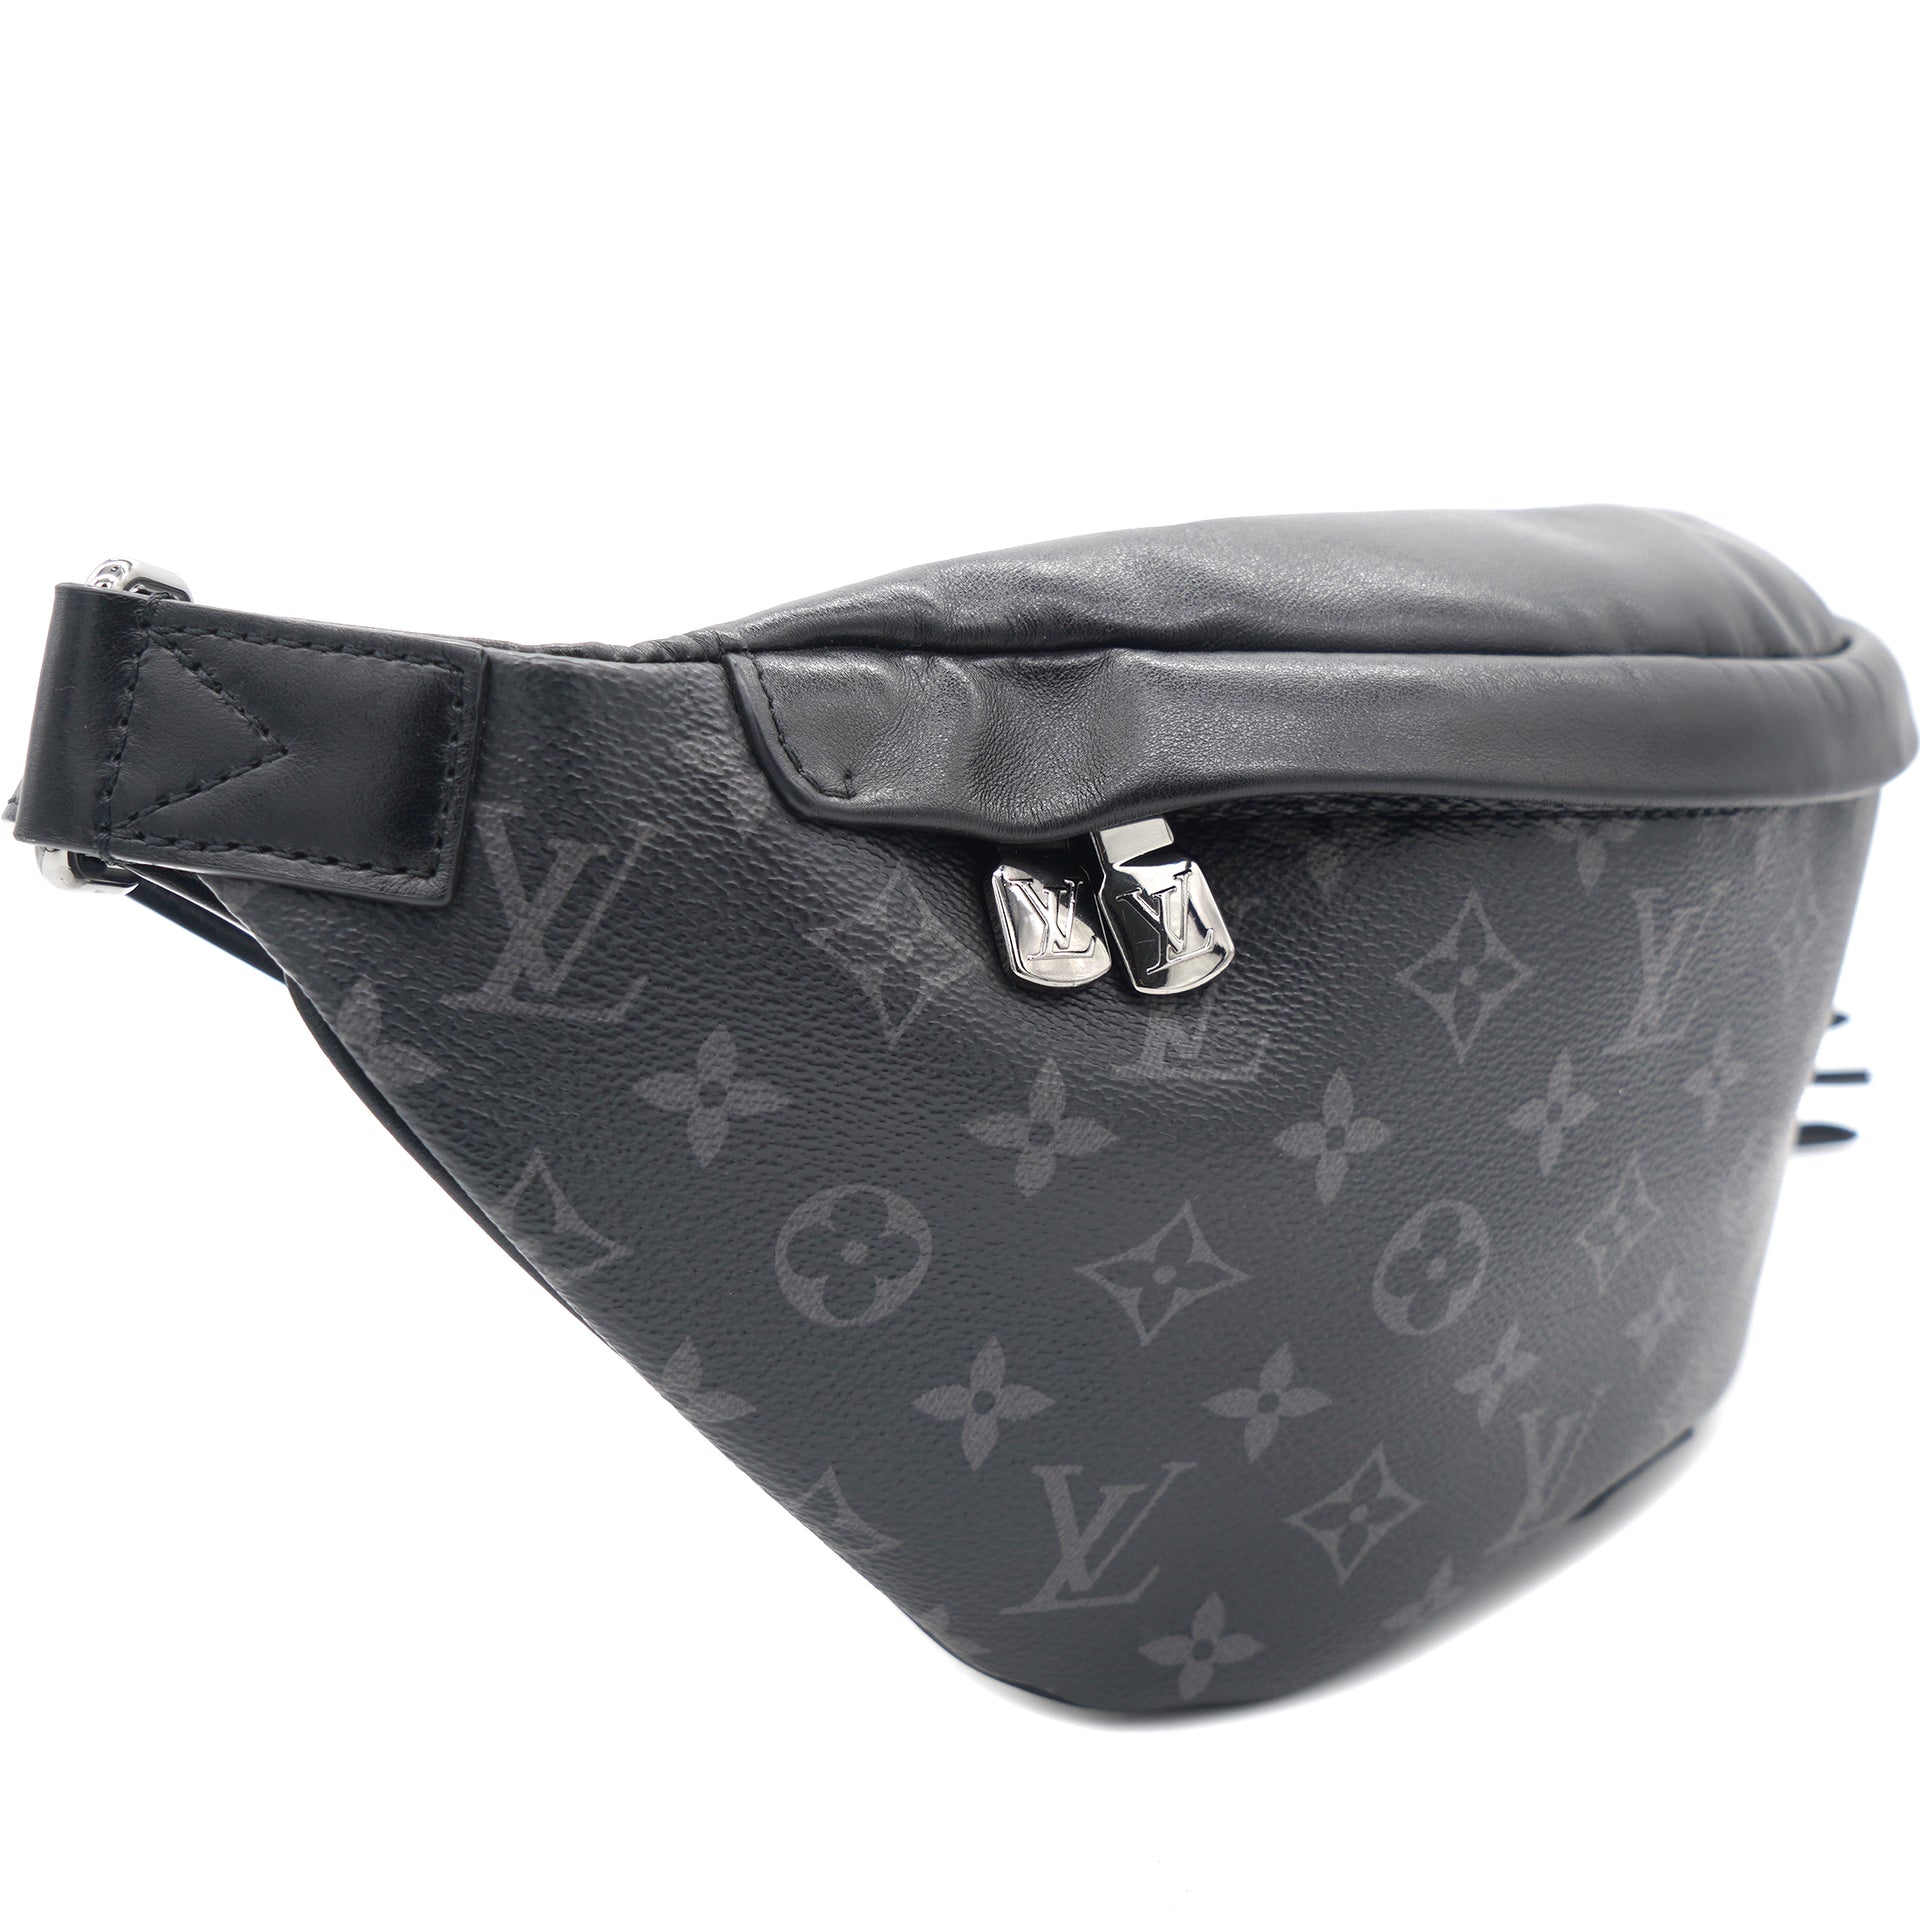 F.Snkr Store - LOUIS VUITTON DISCOVERY BUMBAG Price